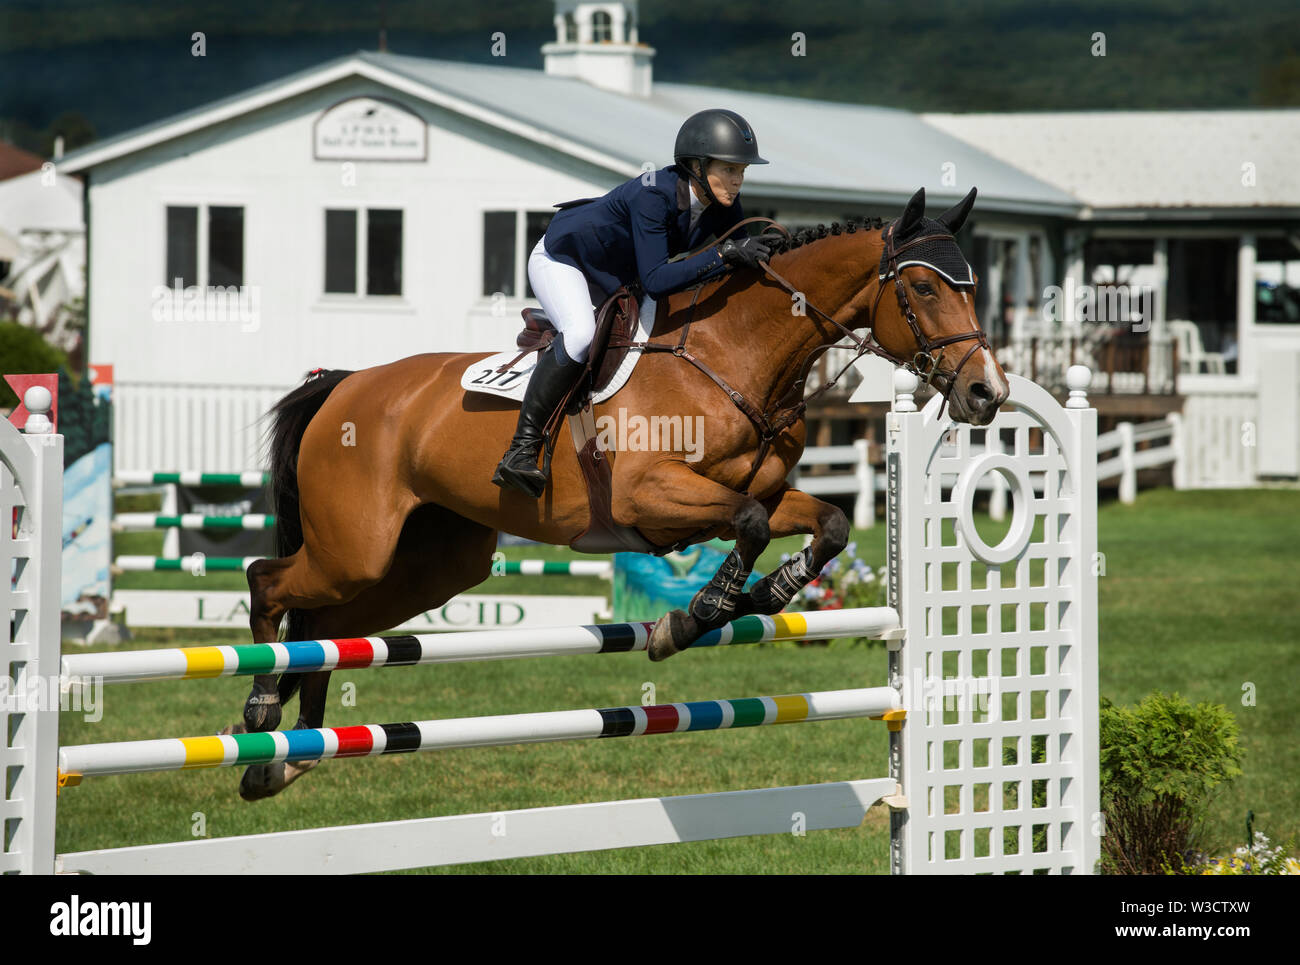 50th annual Lake Placid horse show (LPHS) at Lake Placid NY., USA.  700 horses competed in the 2019 hunter and Jumper competition in Lake Placid, Stock Photo